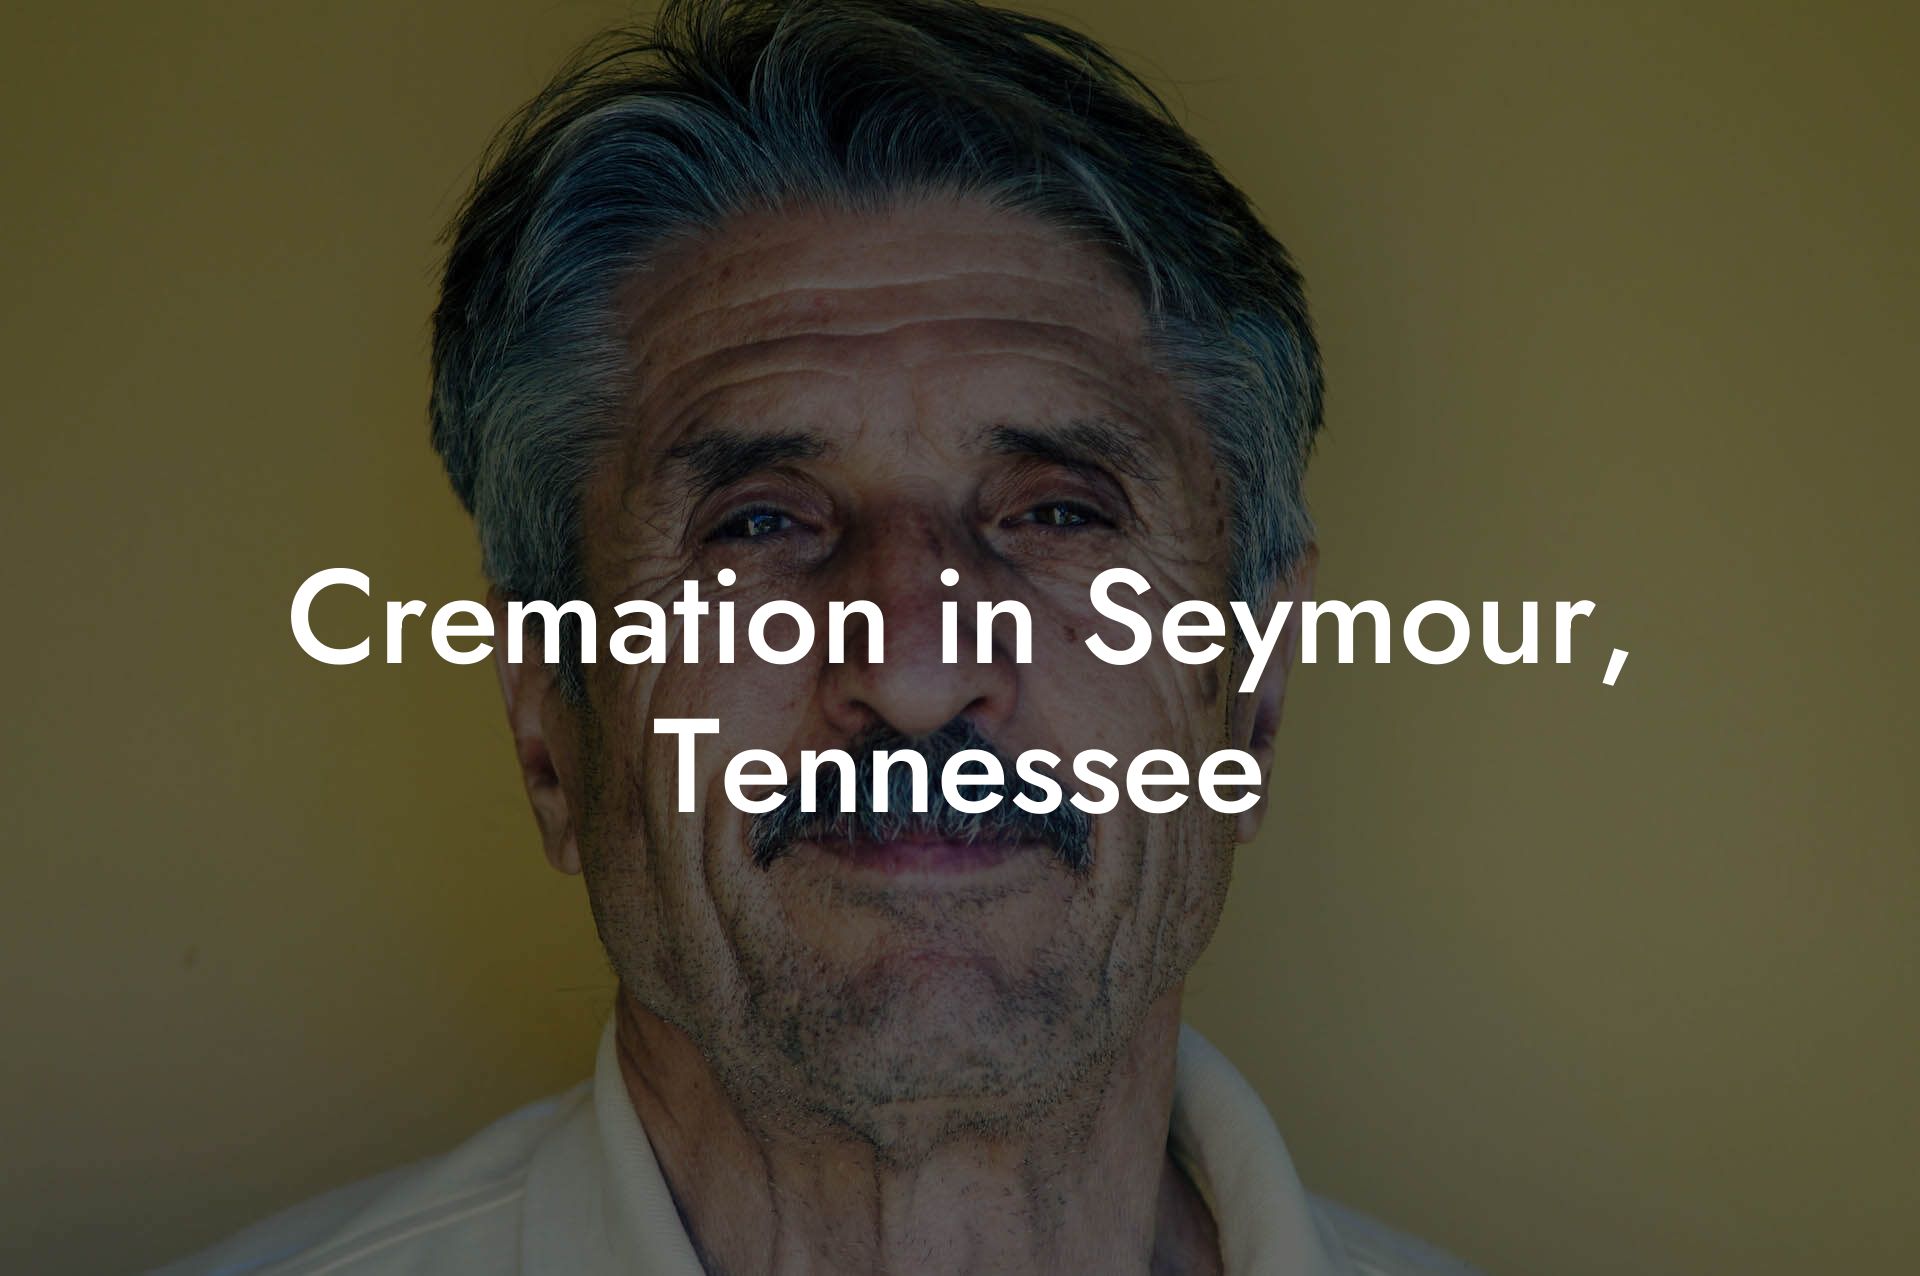 Cremation in Seymour, Tennessee